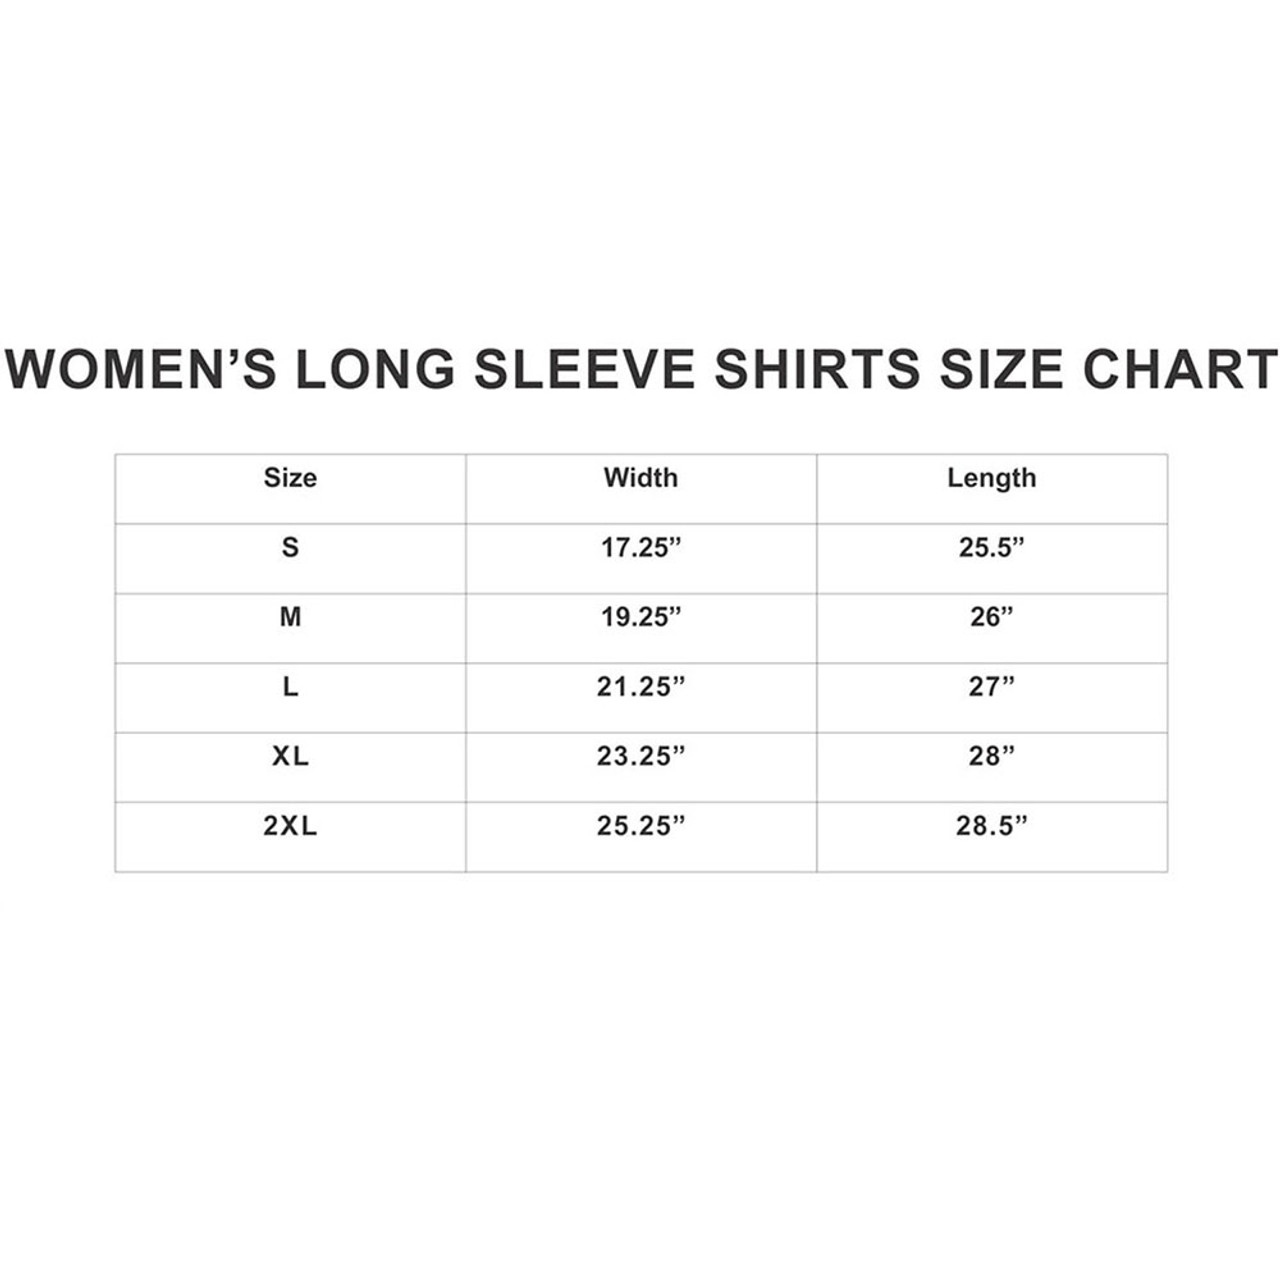 Greatest Blessings Mother's Day Long Sleeve Shirt product image